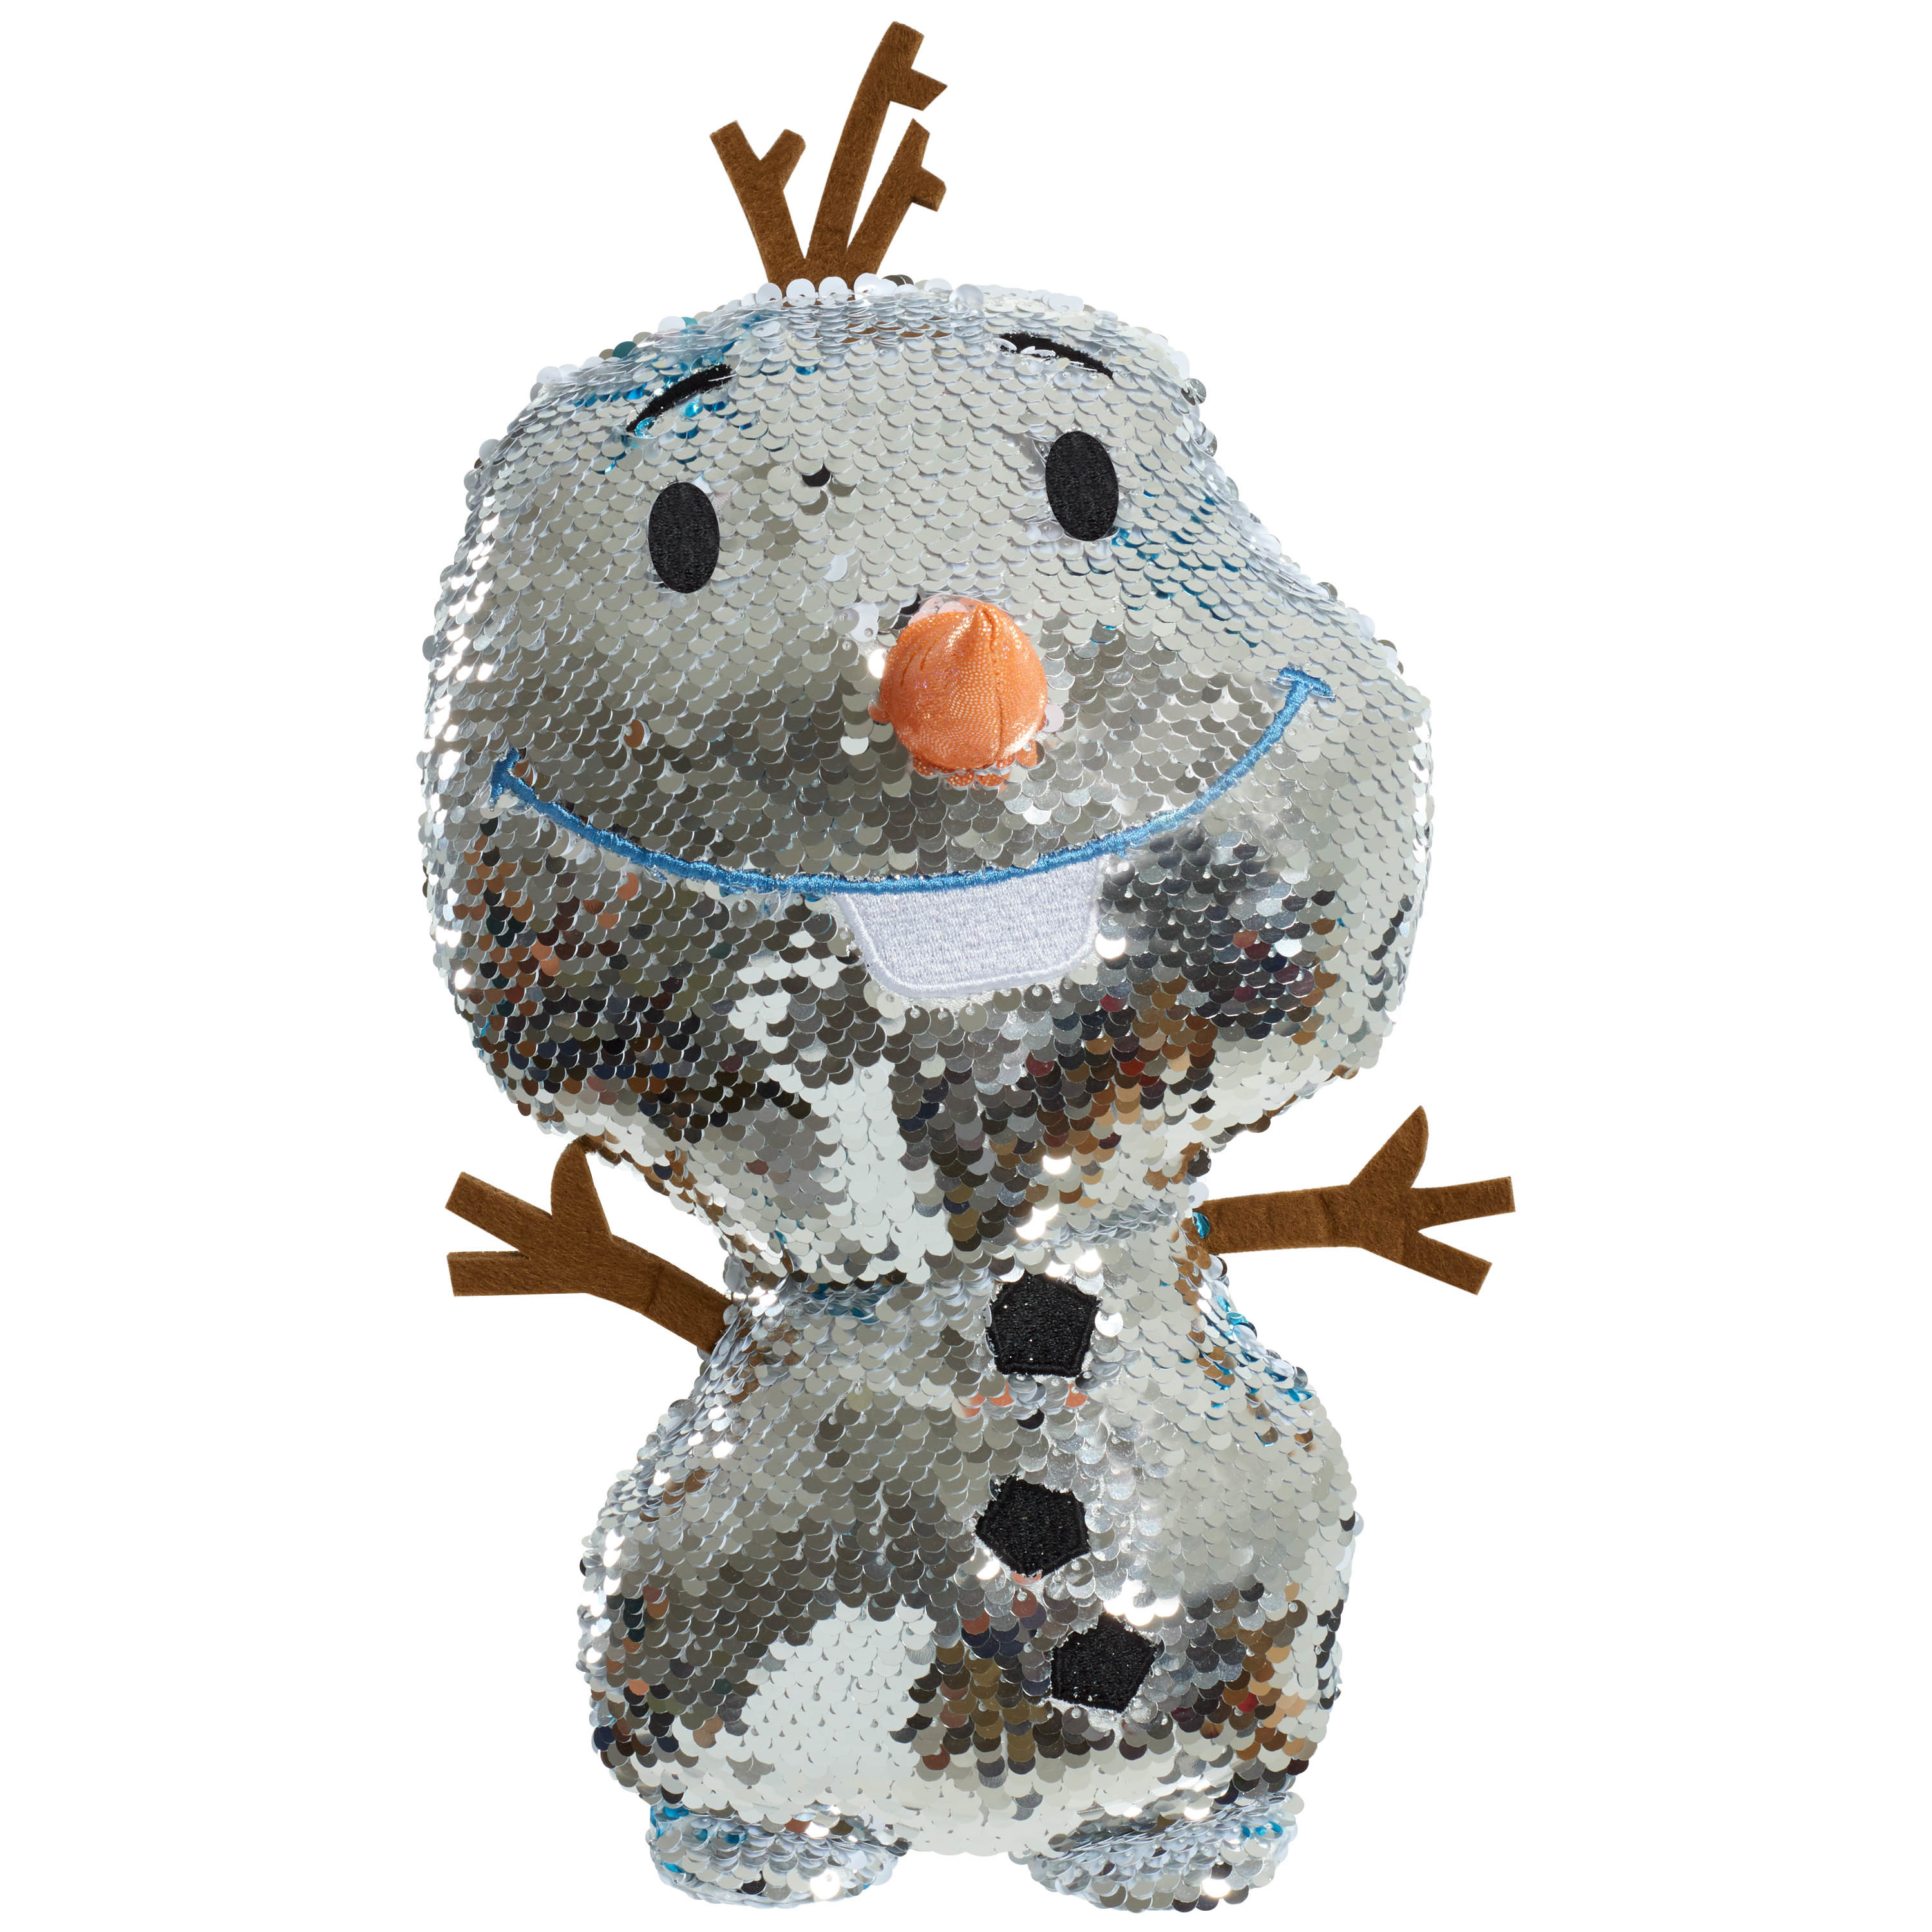 Disney Frozen 2 Reversible Sequins Large Plush Olaf, Officially Licensed Kids Toys for Ages 3 Up, Gifts and Presents - image 1 of 5